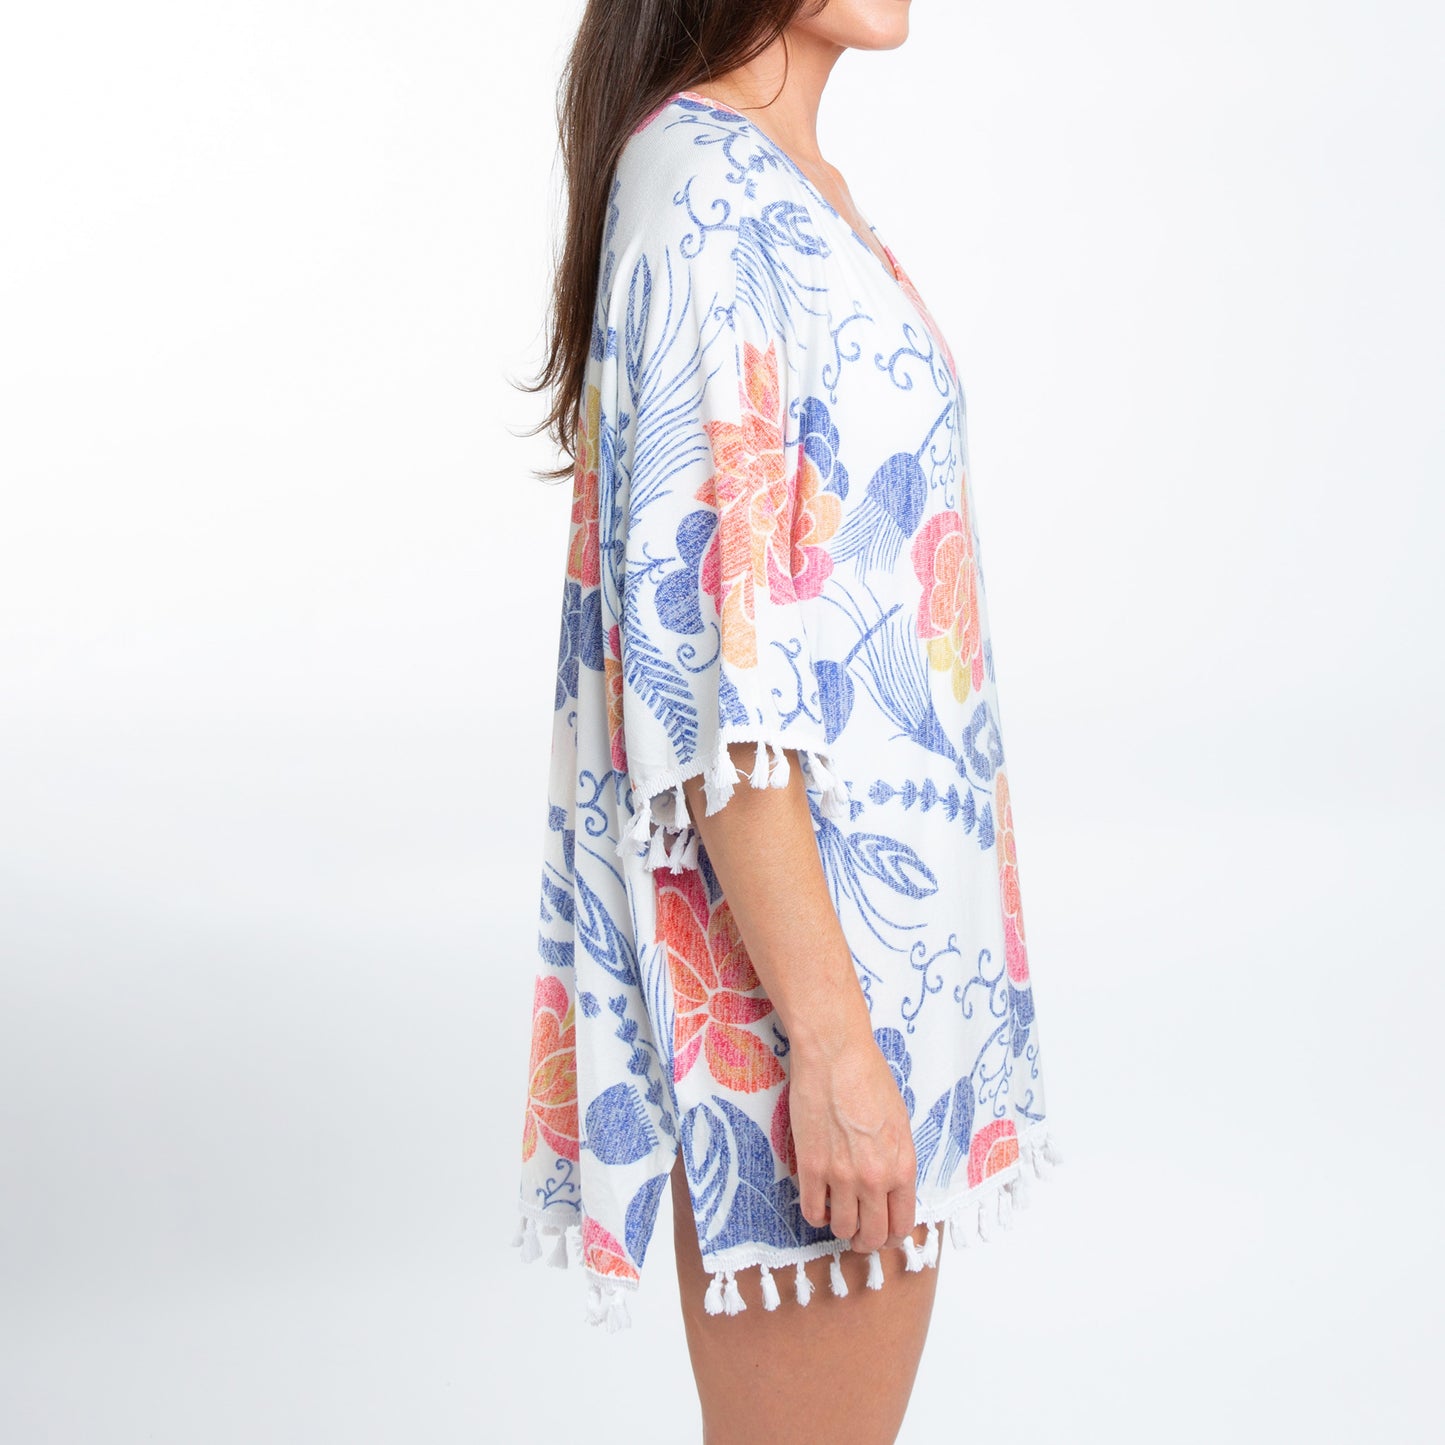 Elsie Bright Floral One Size Beach Swimsuit Cover Up